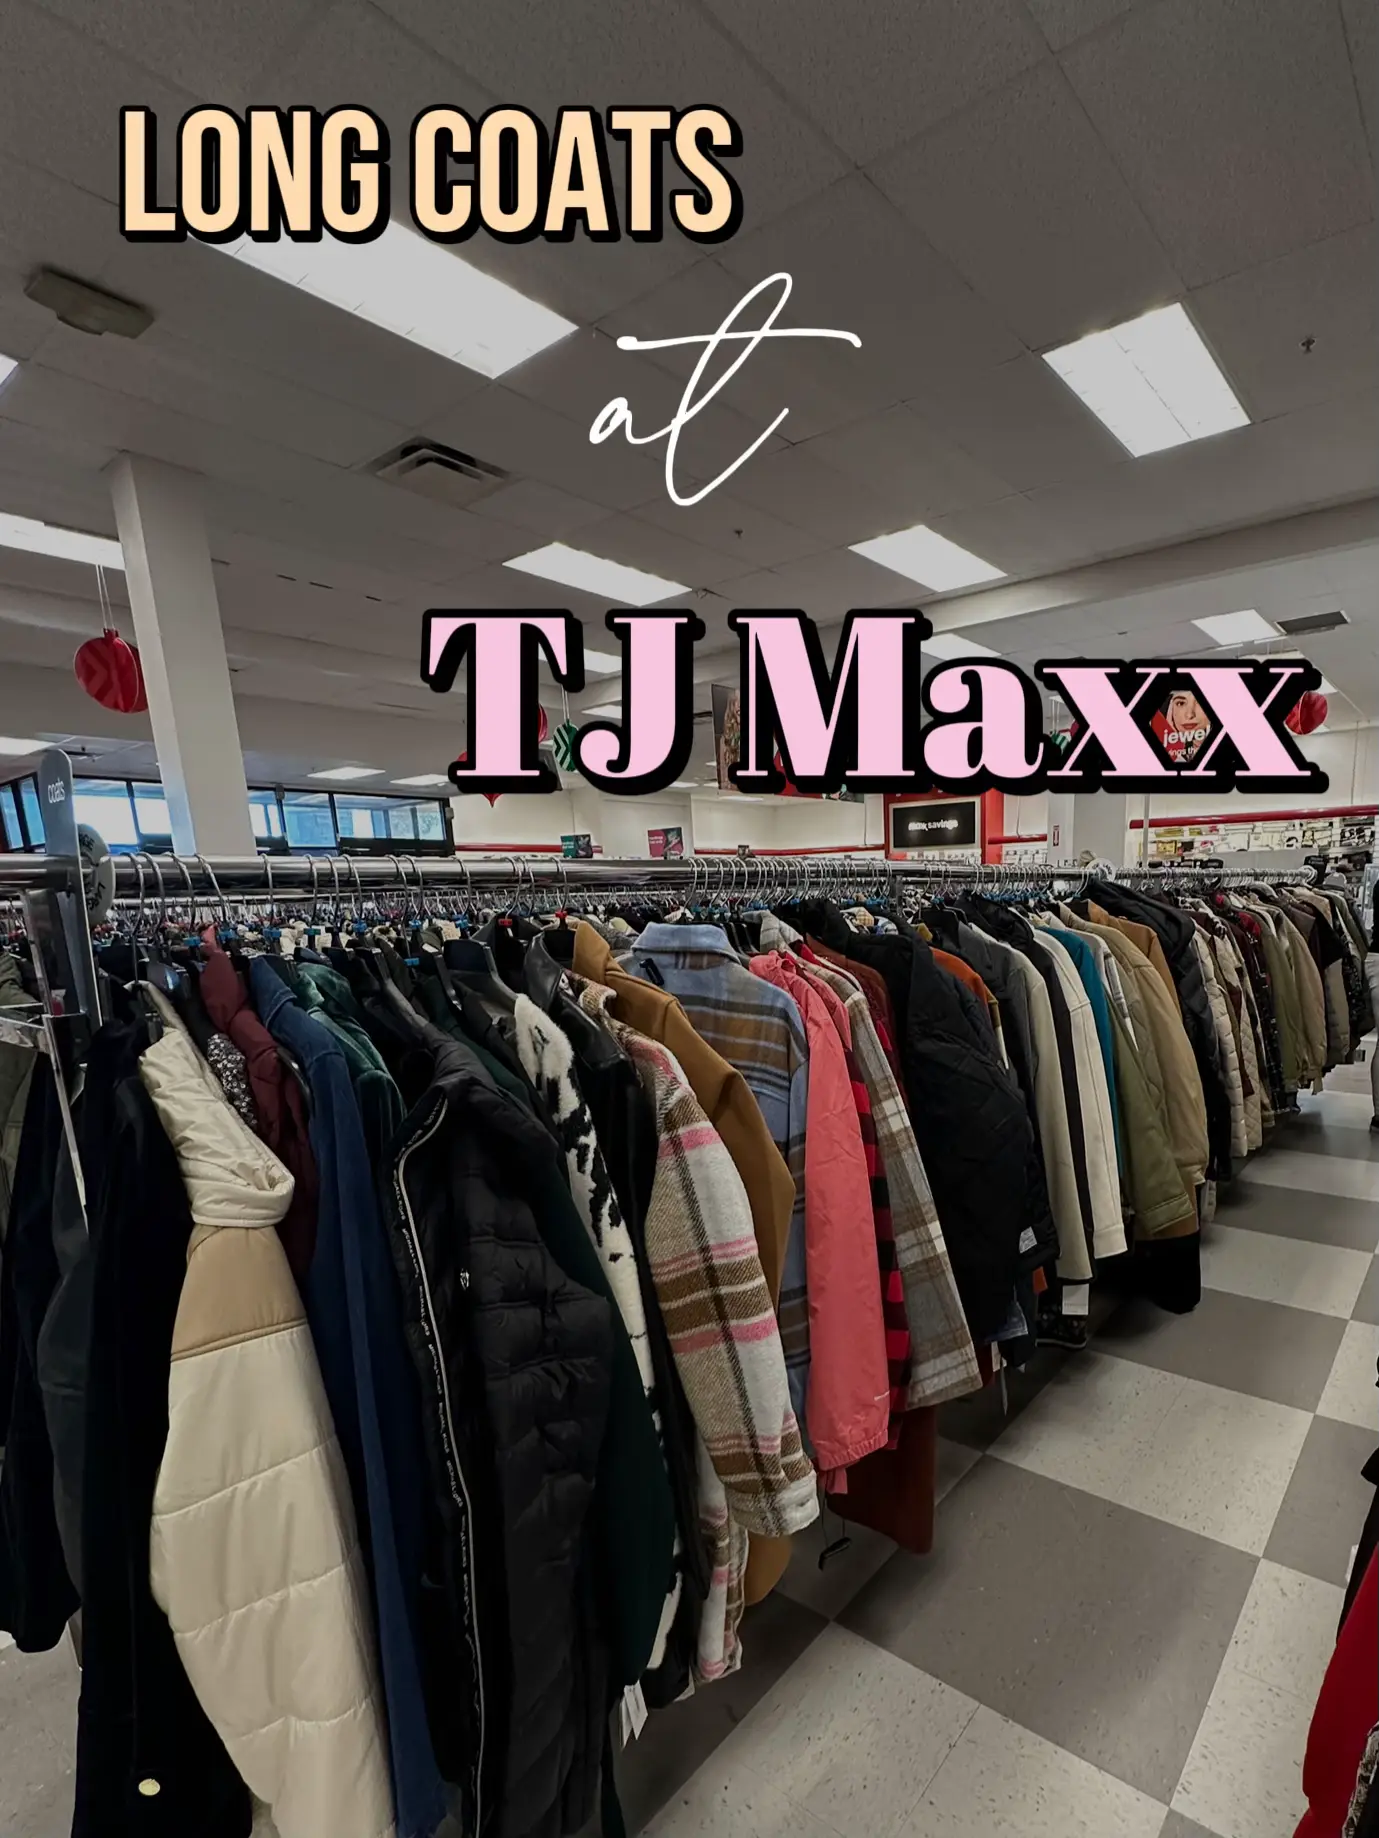 Plato's Closet Review - The Spirited Thrifter